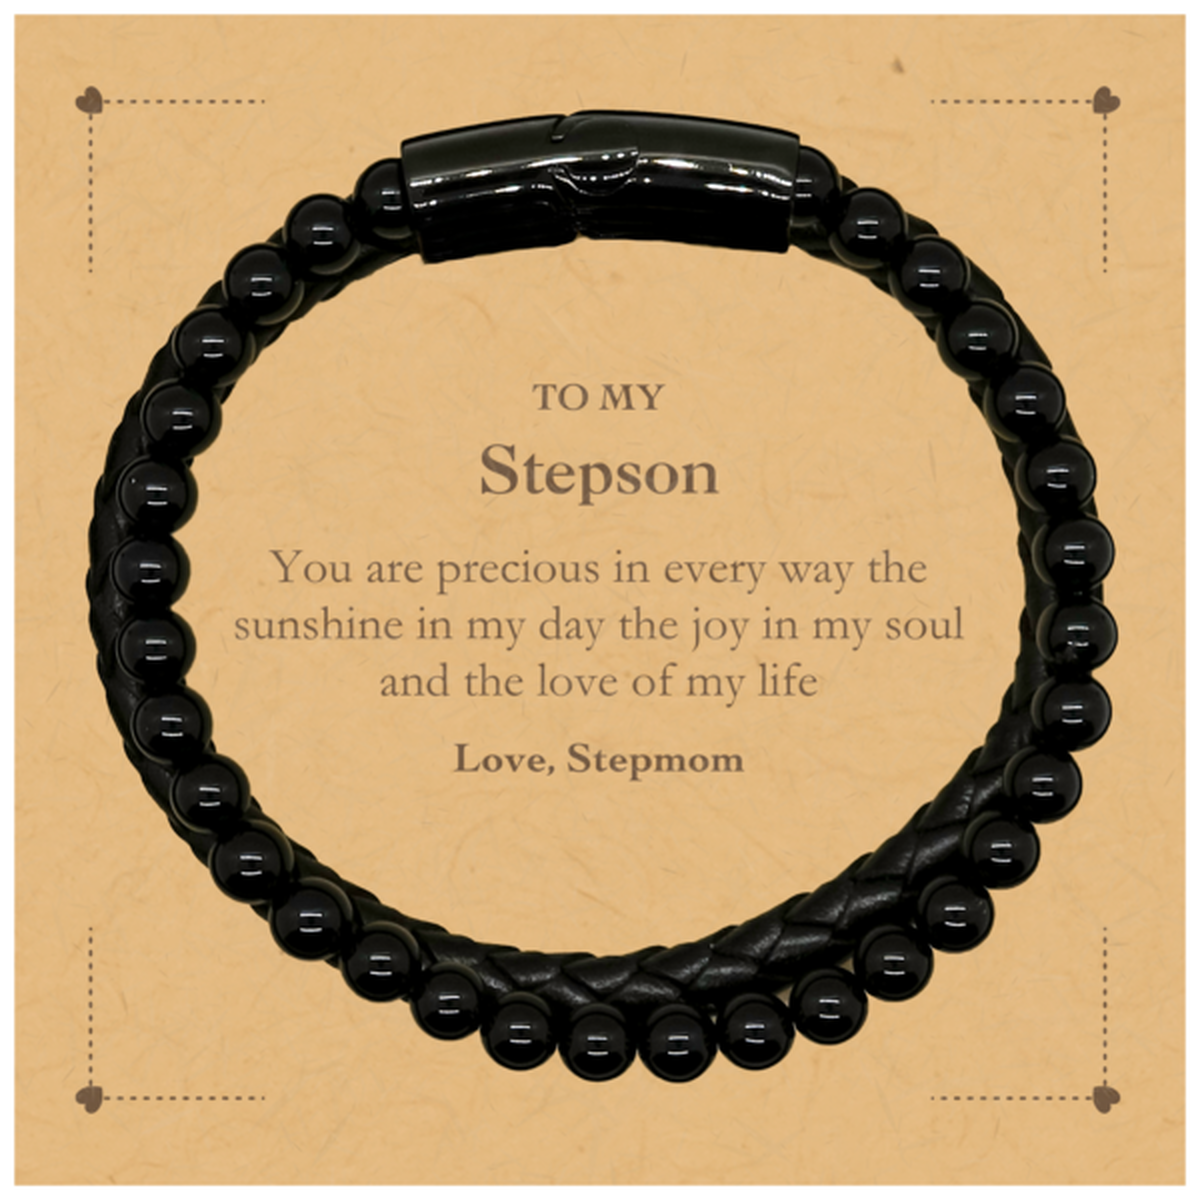 Graduation Gifts for Stepson Stone Leather Bracelets Present from Stepmom, Christmas Stepson Birthday Gifts Stepson You are precious in every way the sunshine in my day. Love, Stepmom